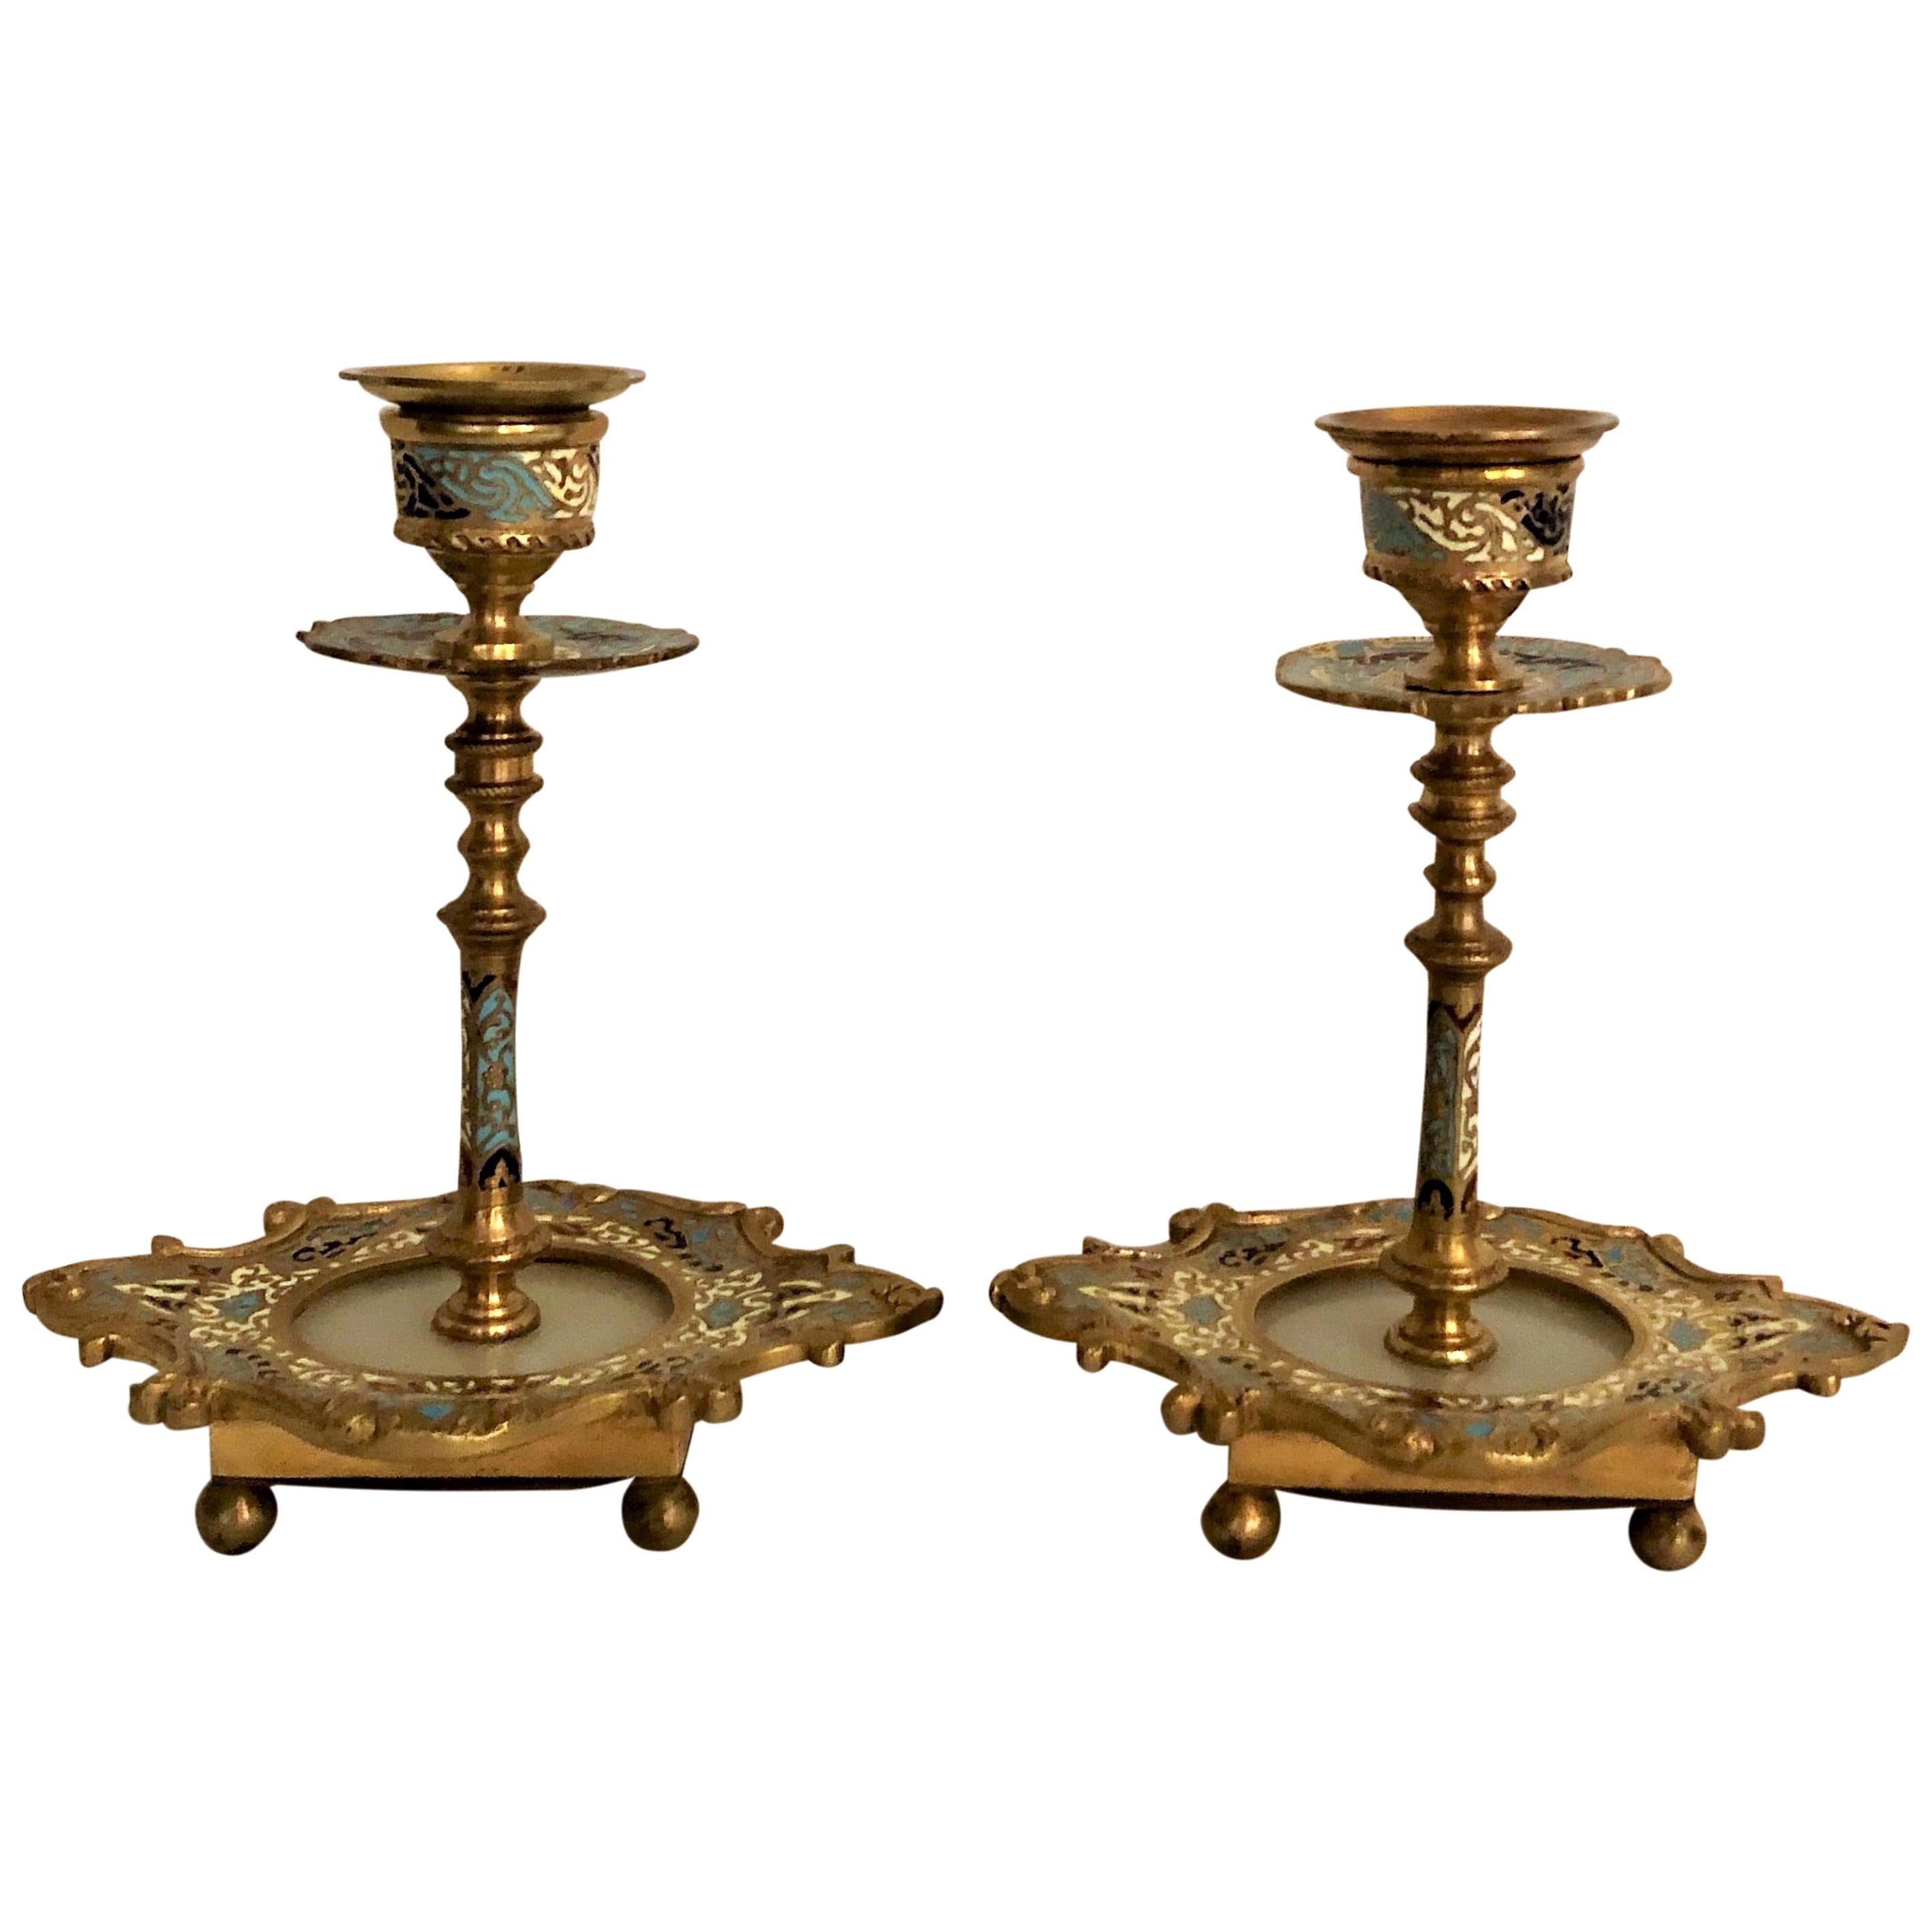 Pair of Antique Cloisonné, Marble and Onyx Candlesticks